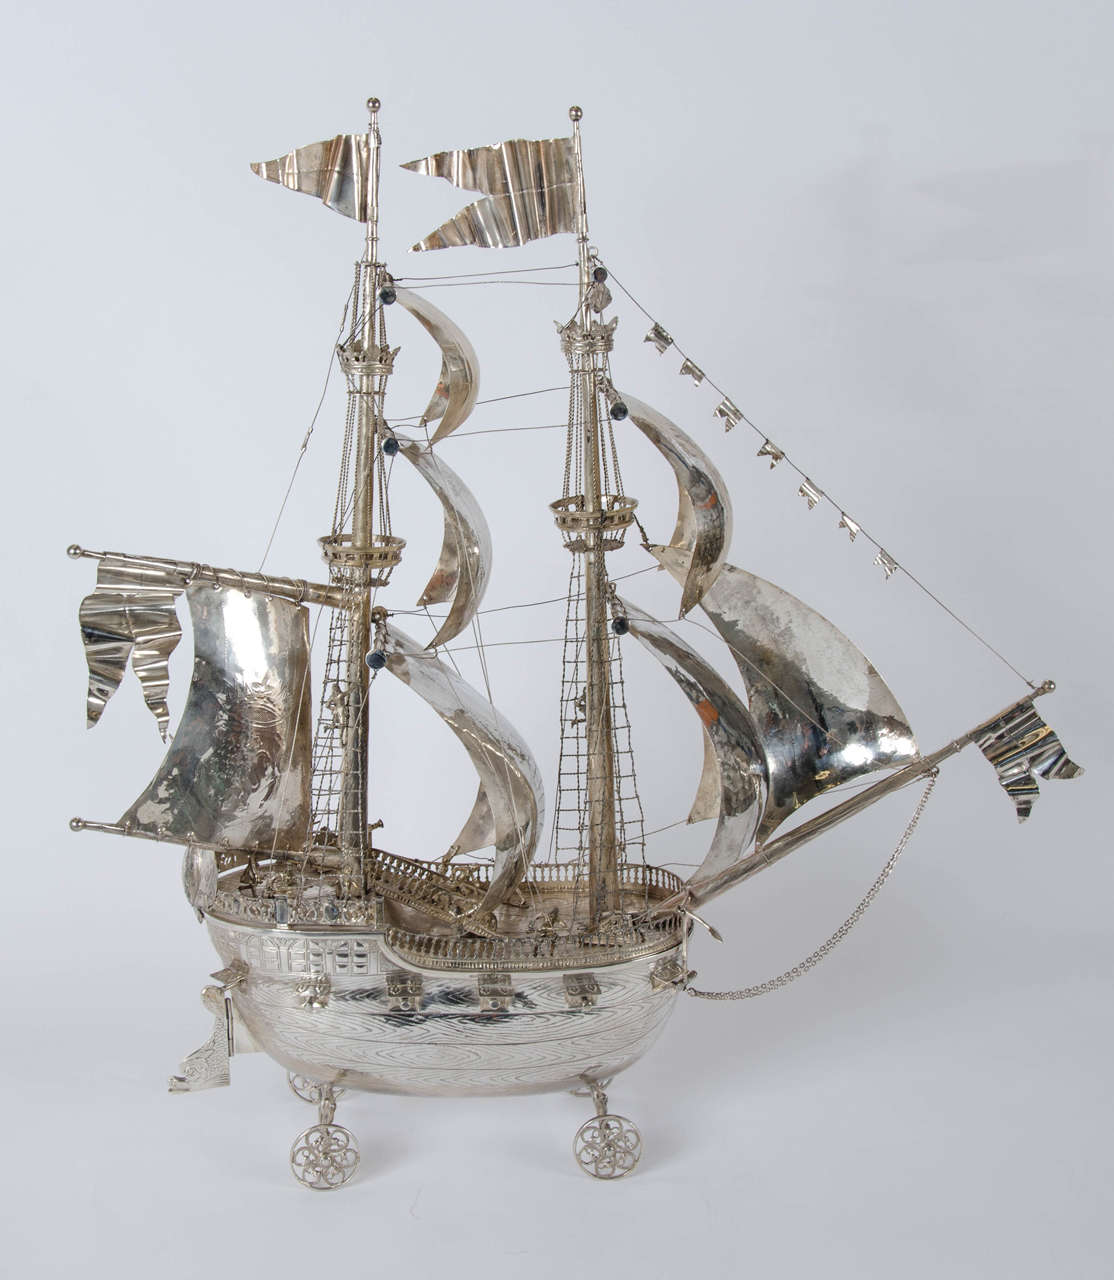 A very fine and impressive silver table nef made by Ludwig Neresheimer & Co of Hanau also struck with English silver import hallmarks for London, Berthold Mueller 1913. Weight of the galleon 3296 grams. This large silver galleon has the provenance